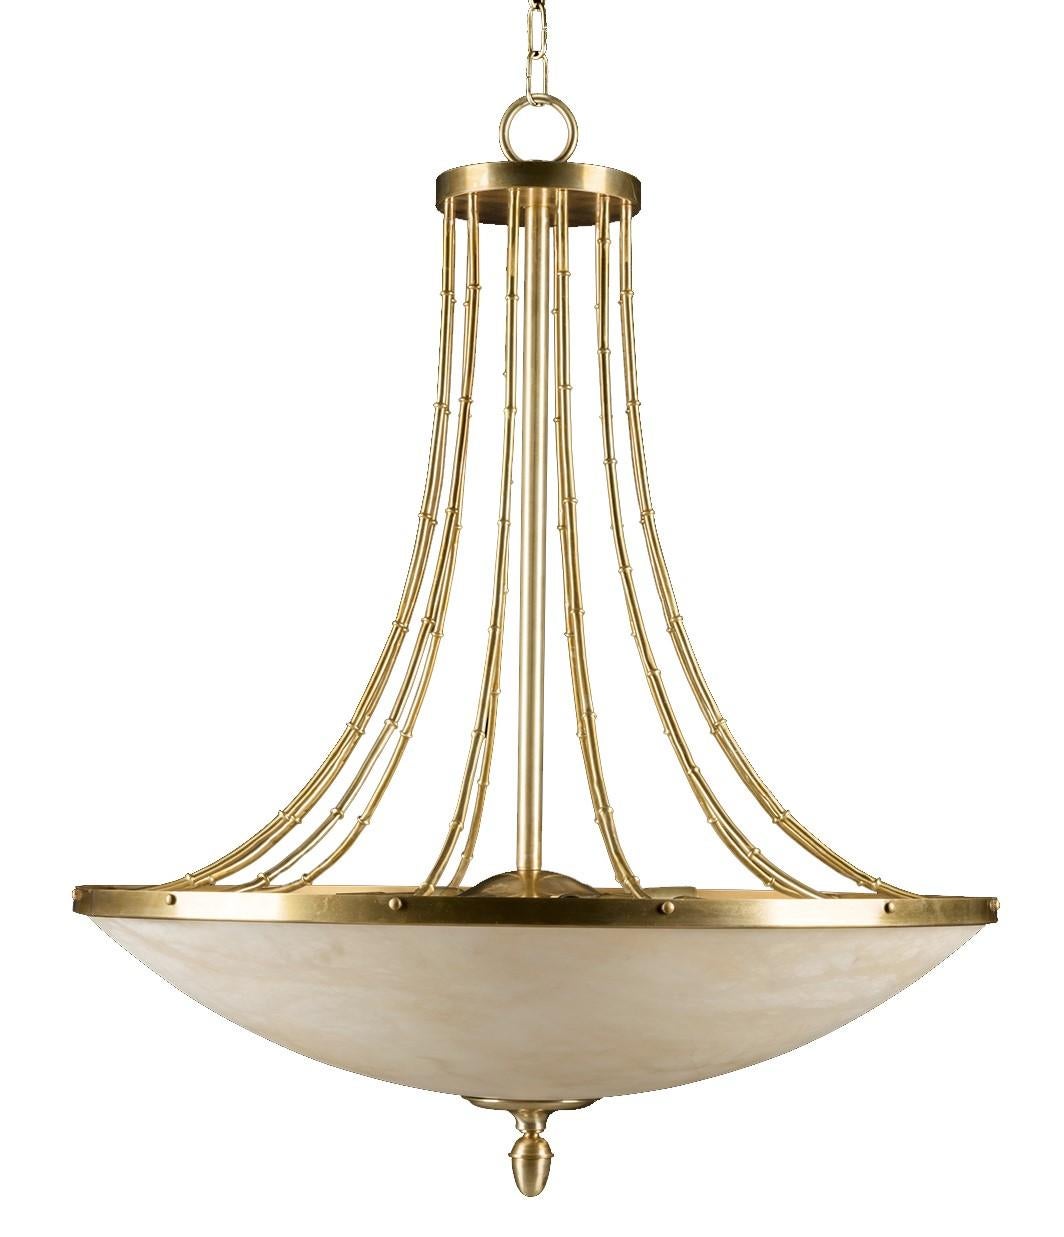 This classically-designed chandelier showcases fine craftsmanship and impeccable attention to detail. Crafted of ivory alabaster, a stately, demilune bowl fixture is outlined by a solid bronze rim and supported by flared metal rods. A delicate nob